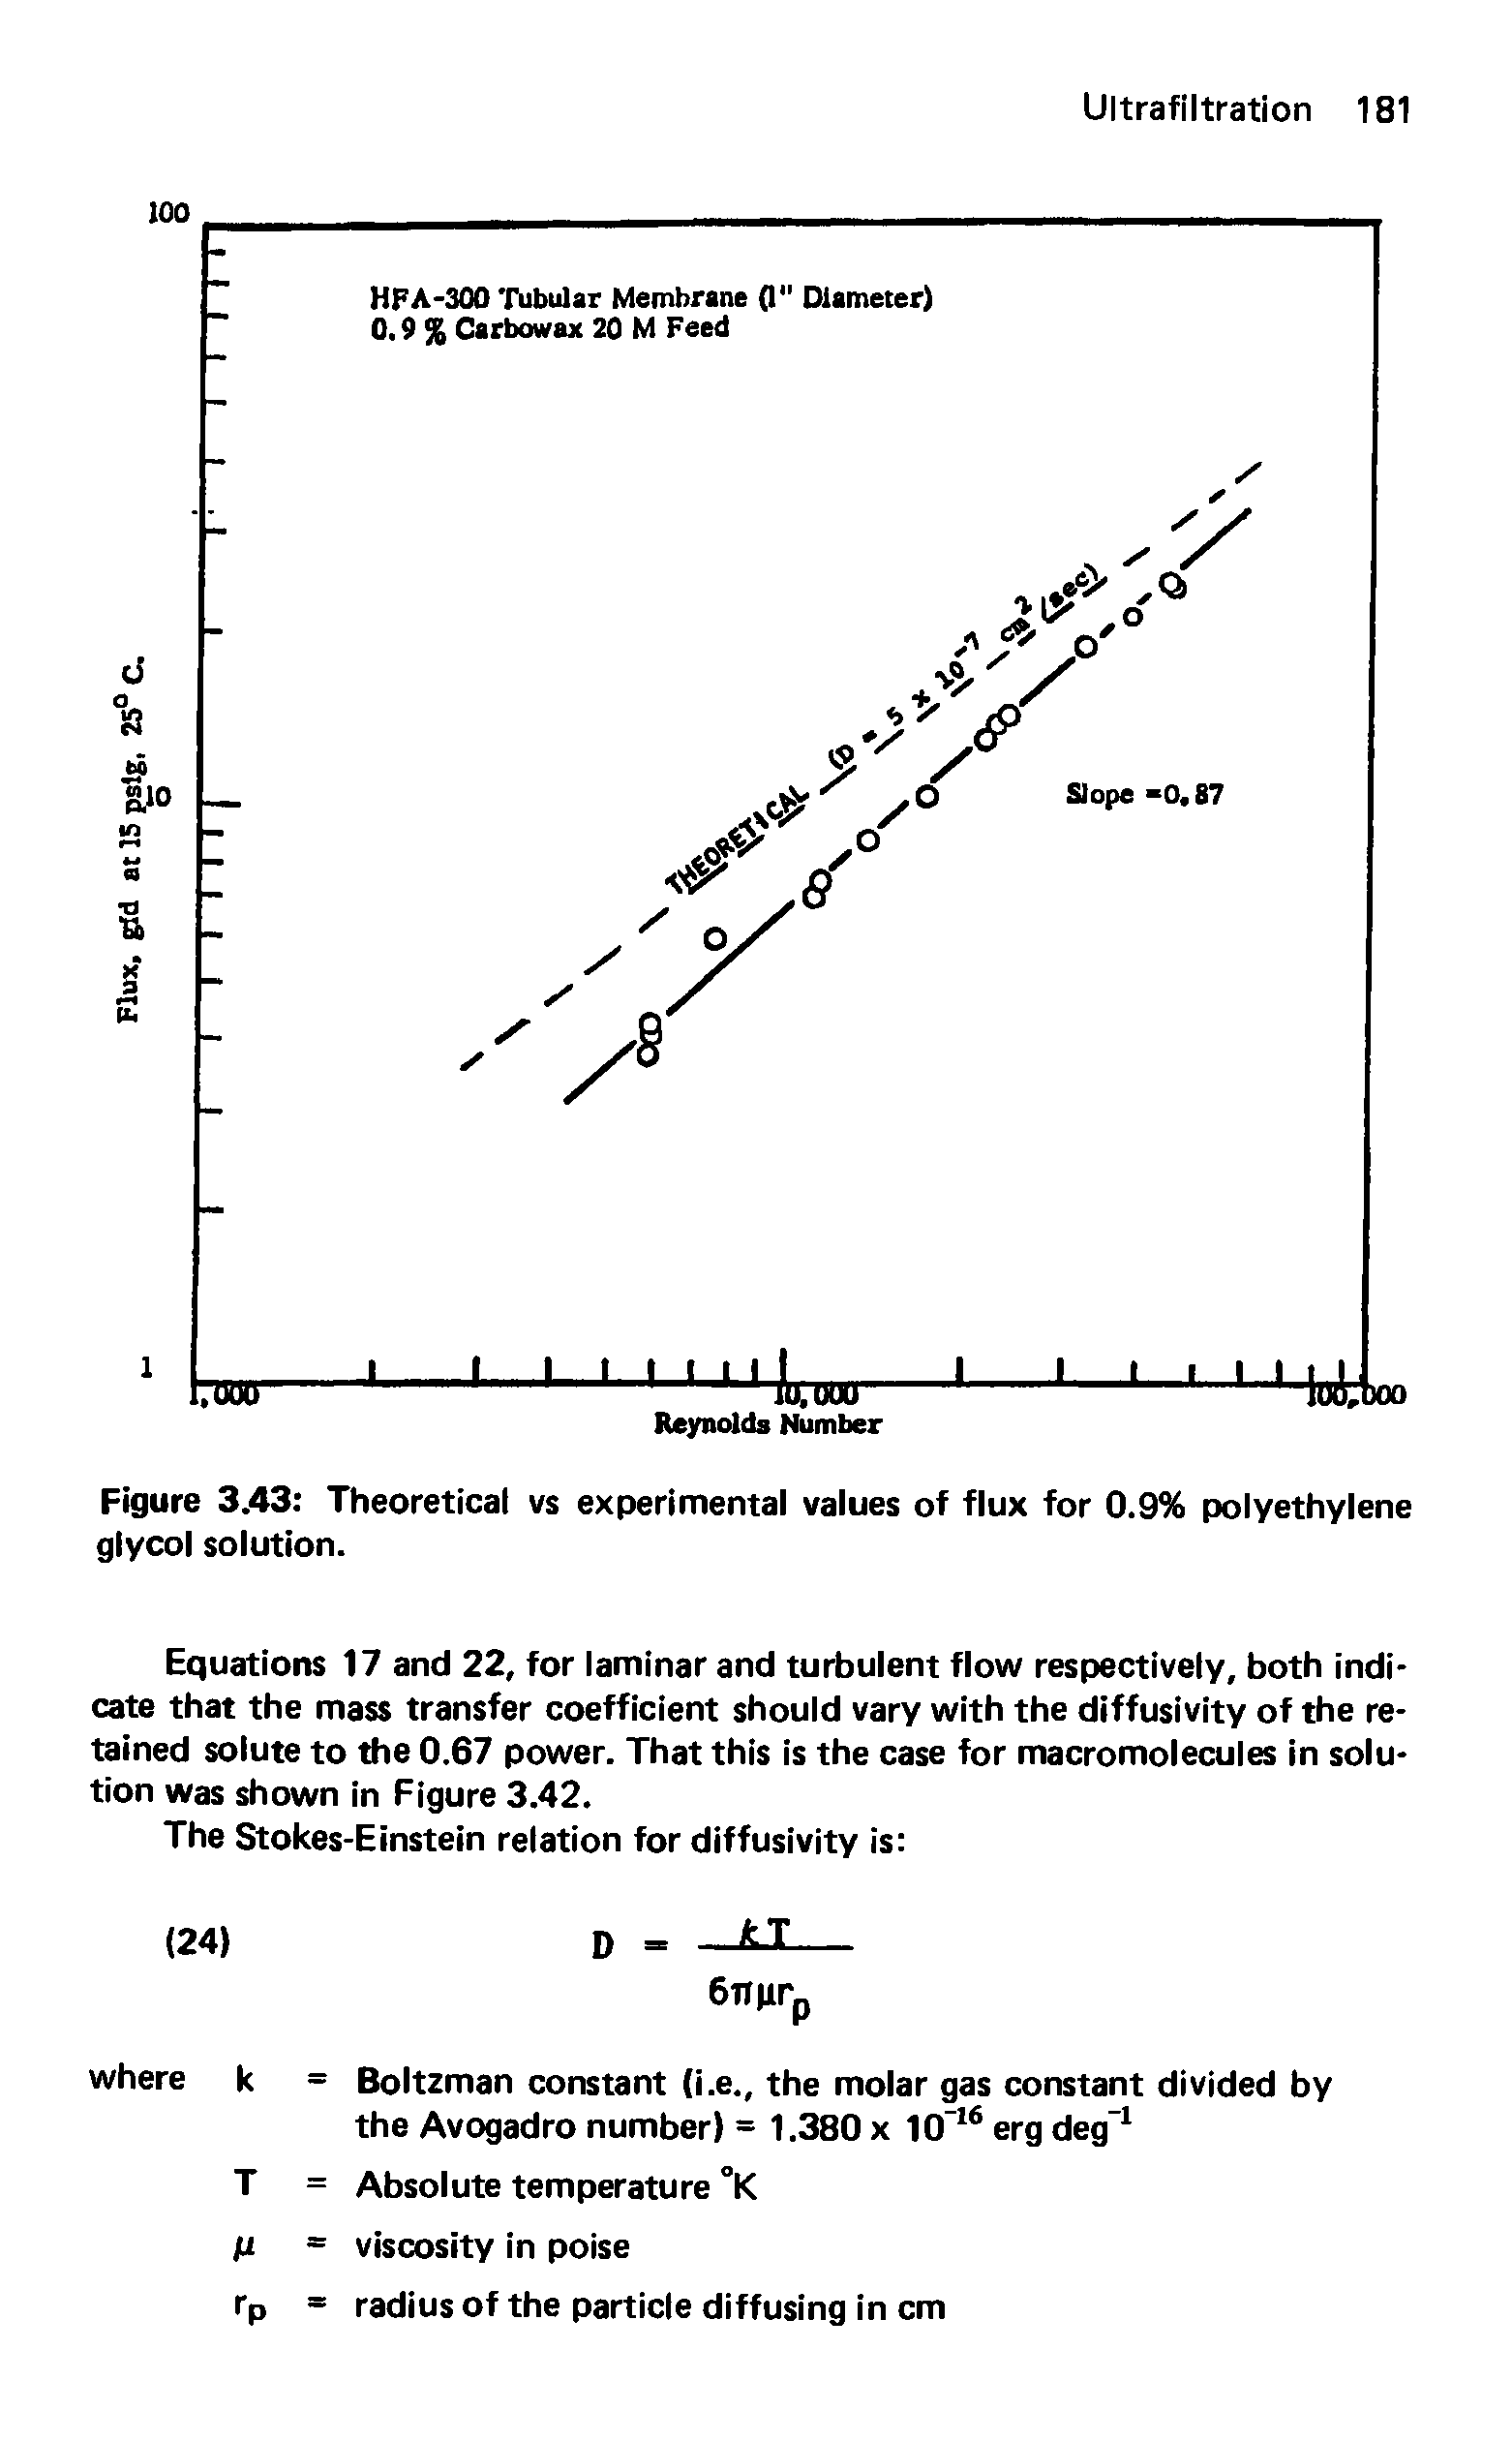 Figure 3.43 Theoretical vs experimental values of flux for 0.9% polyethylene glycol solution.